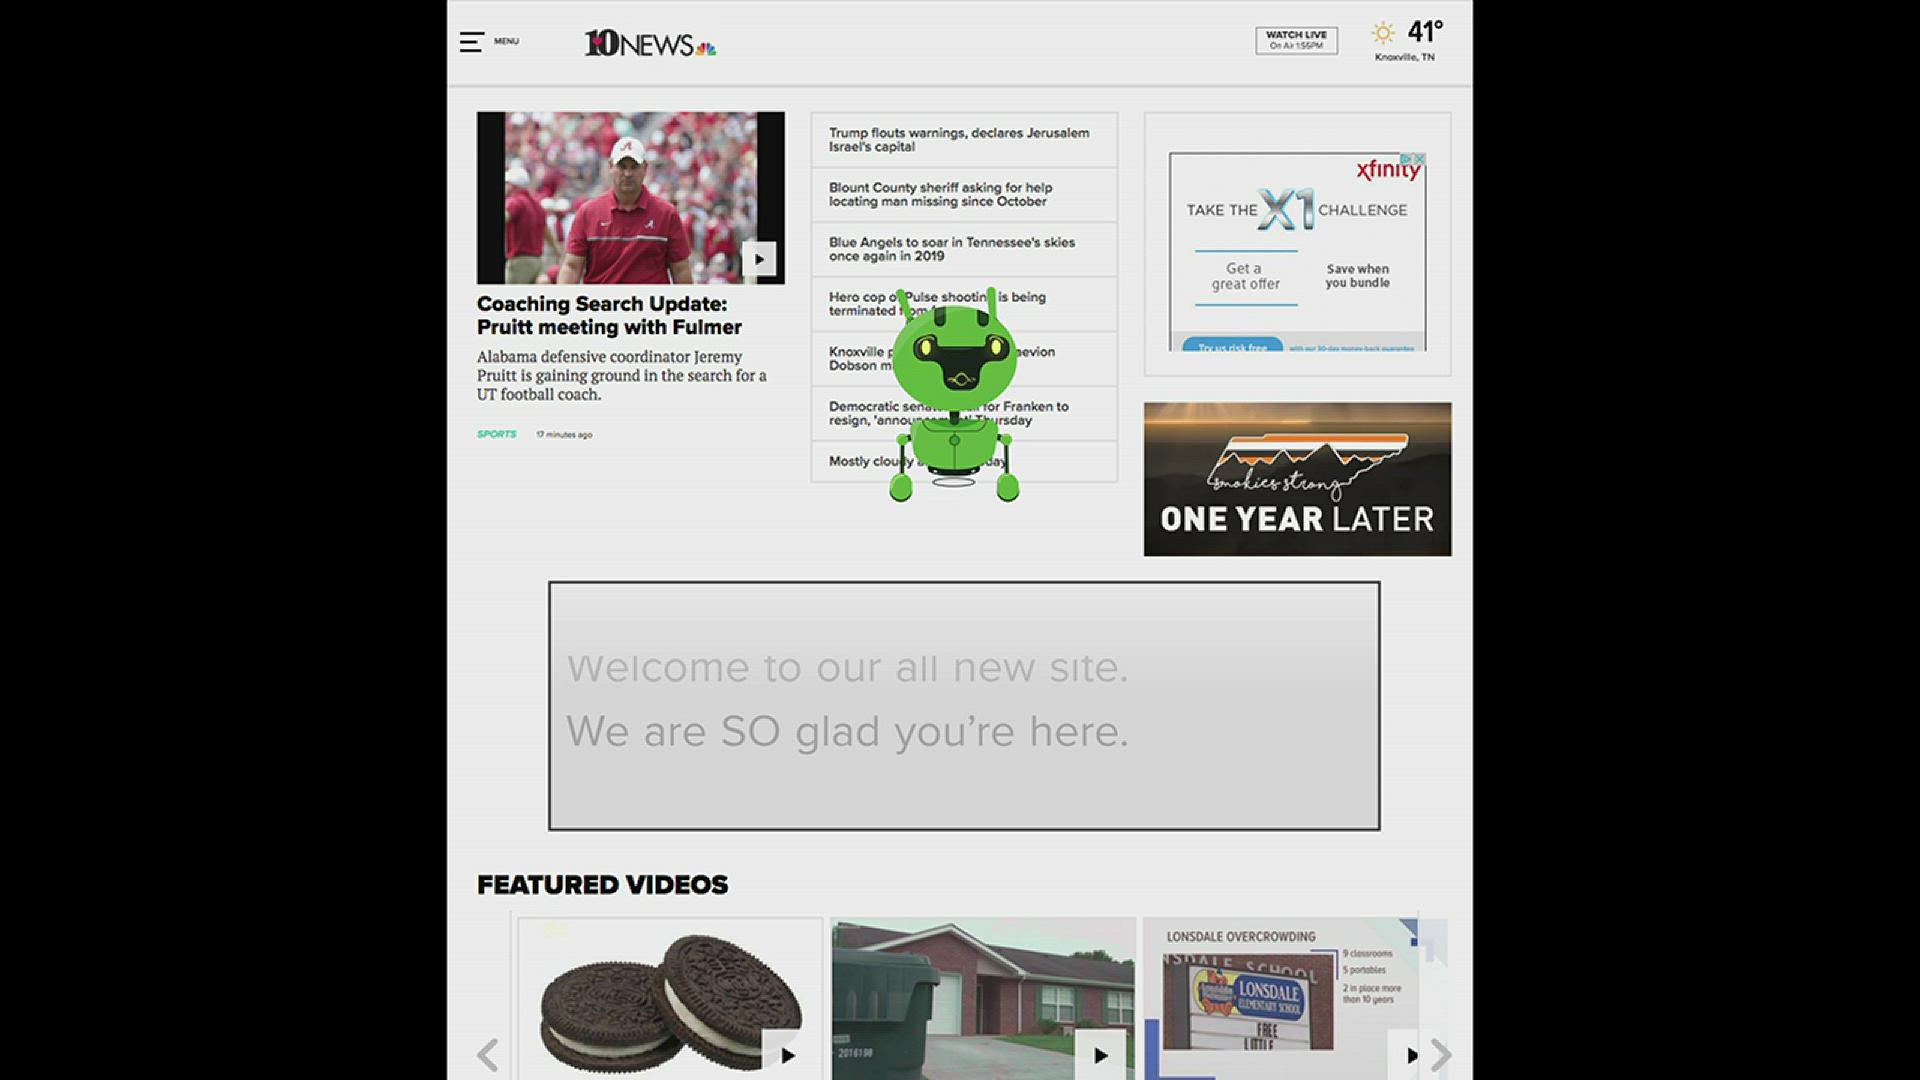 Here is a quick tour of the new features for our website.